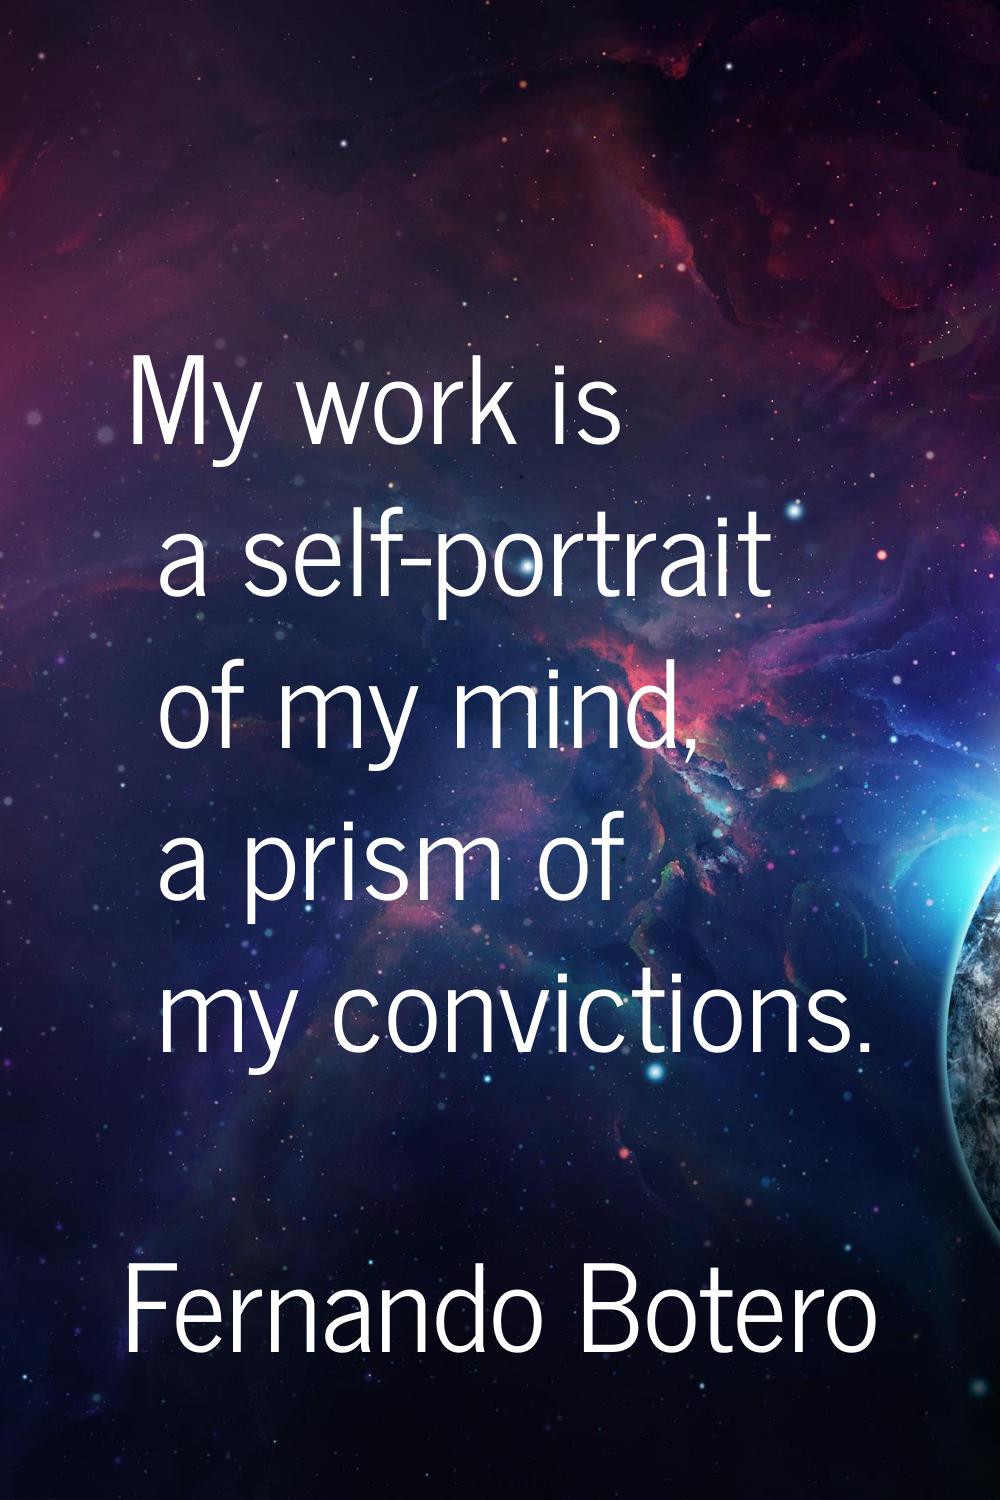 My work is a self-portrait of my mind, a prism of my convictions.